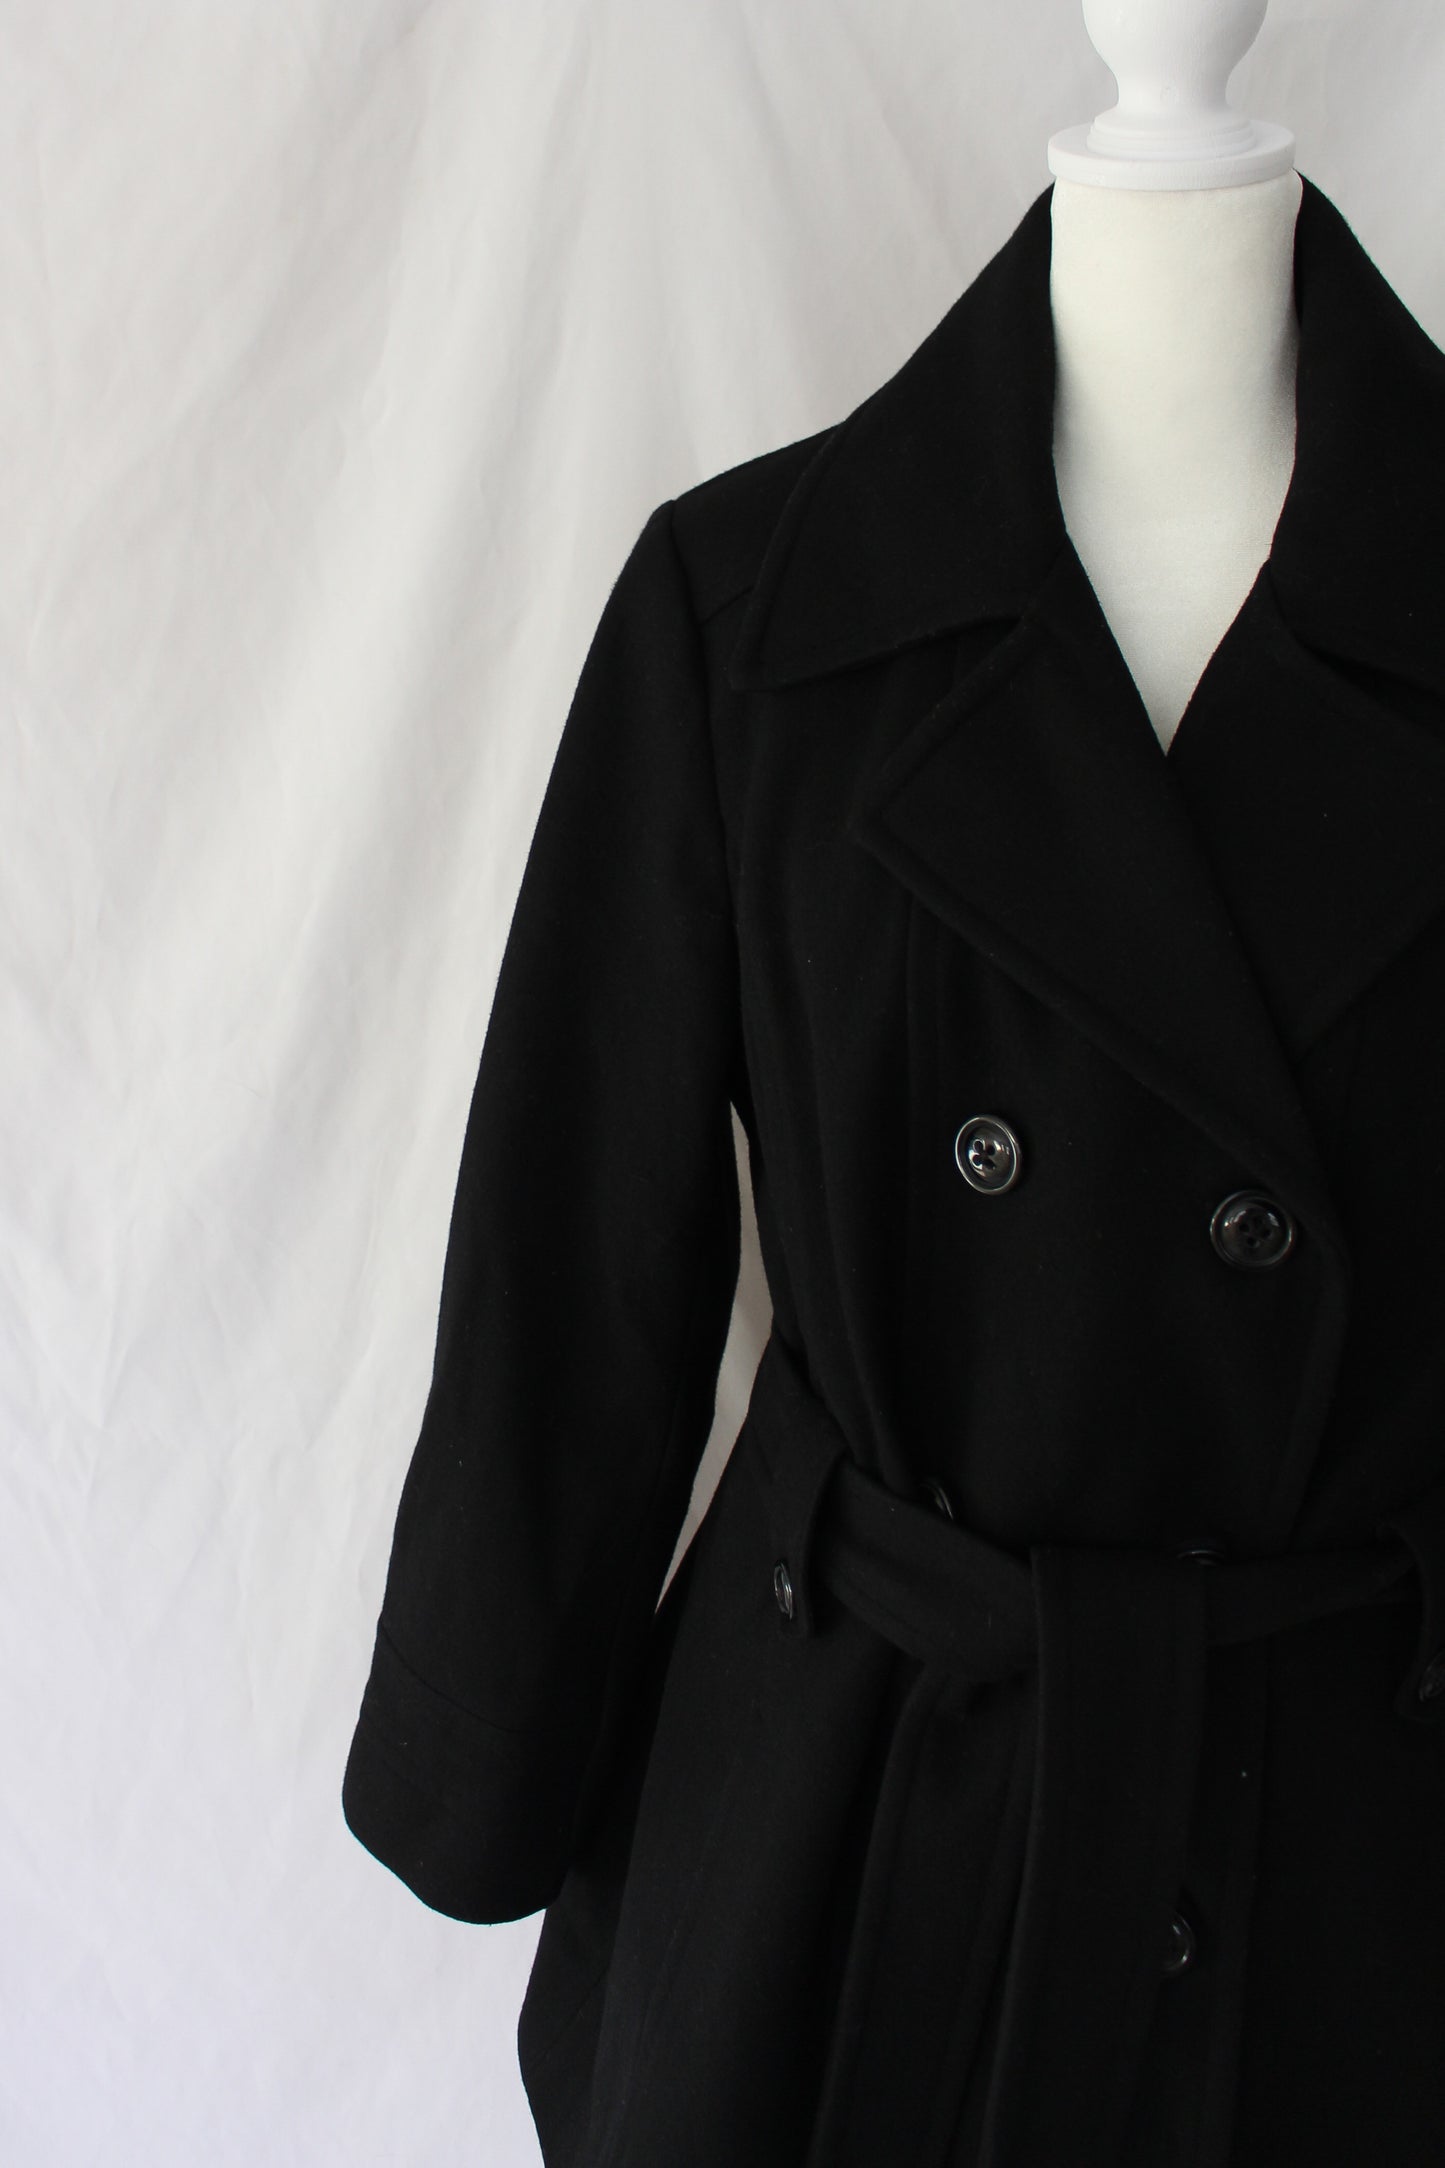 pre-owned peacoat, used peacoat, black double breasted jacket, belted coat